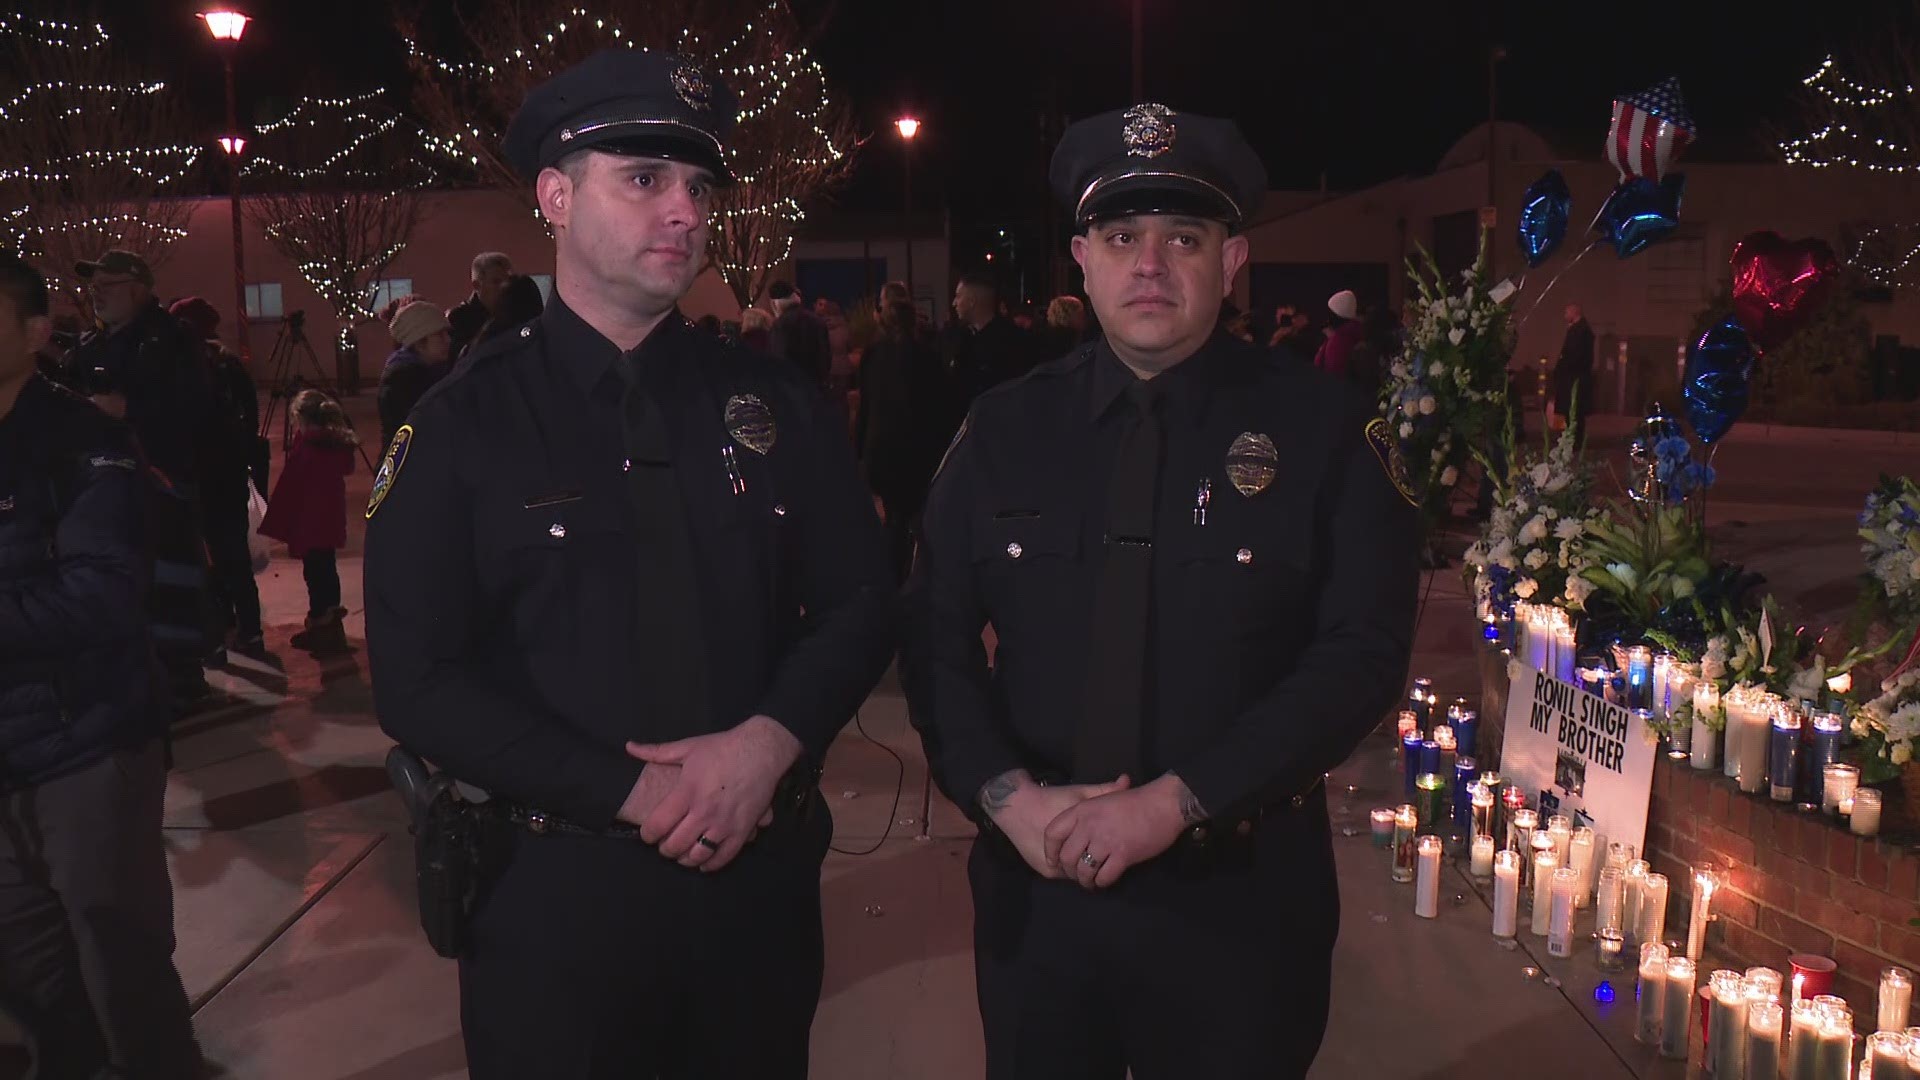 "He's going to live on. Legends never die." A conversation ABC10 had with Stockton Police Officers Jason Da Silva and Jose Torres was touching. They knew fallen Newman Police Cpl. Ronil Singh for more than 10 years. The two men said it’s hard to put their uniform on now knowing what happened to their brother, but they have to keep going to work to keep Singh's legacy alive.